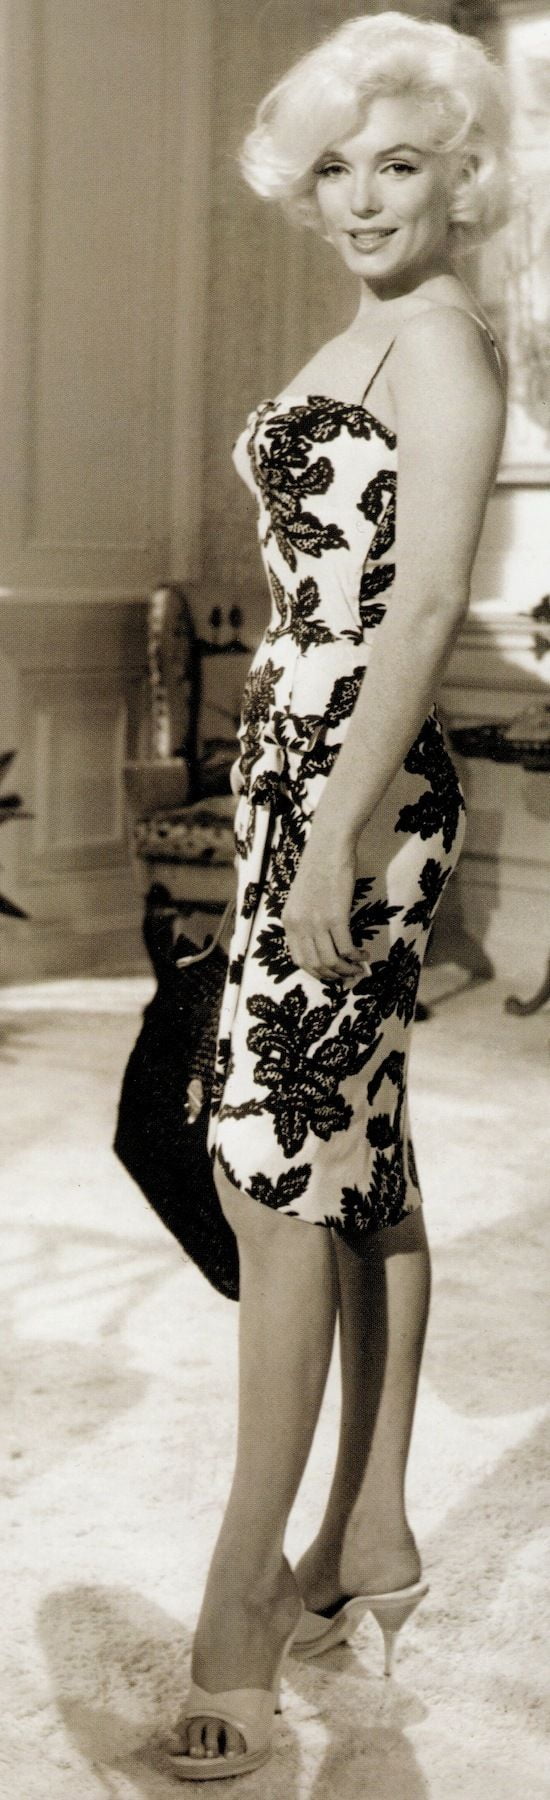 Marilyn in embroidered midi dress